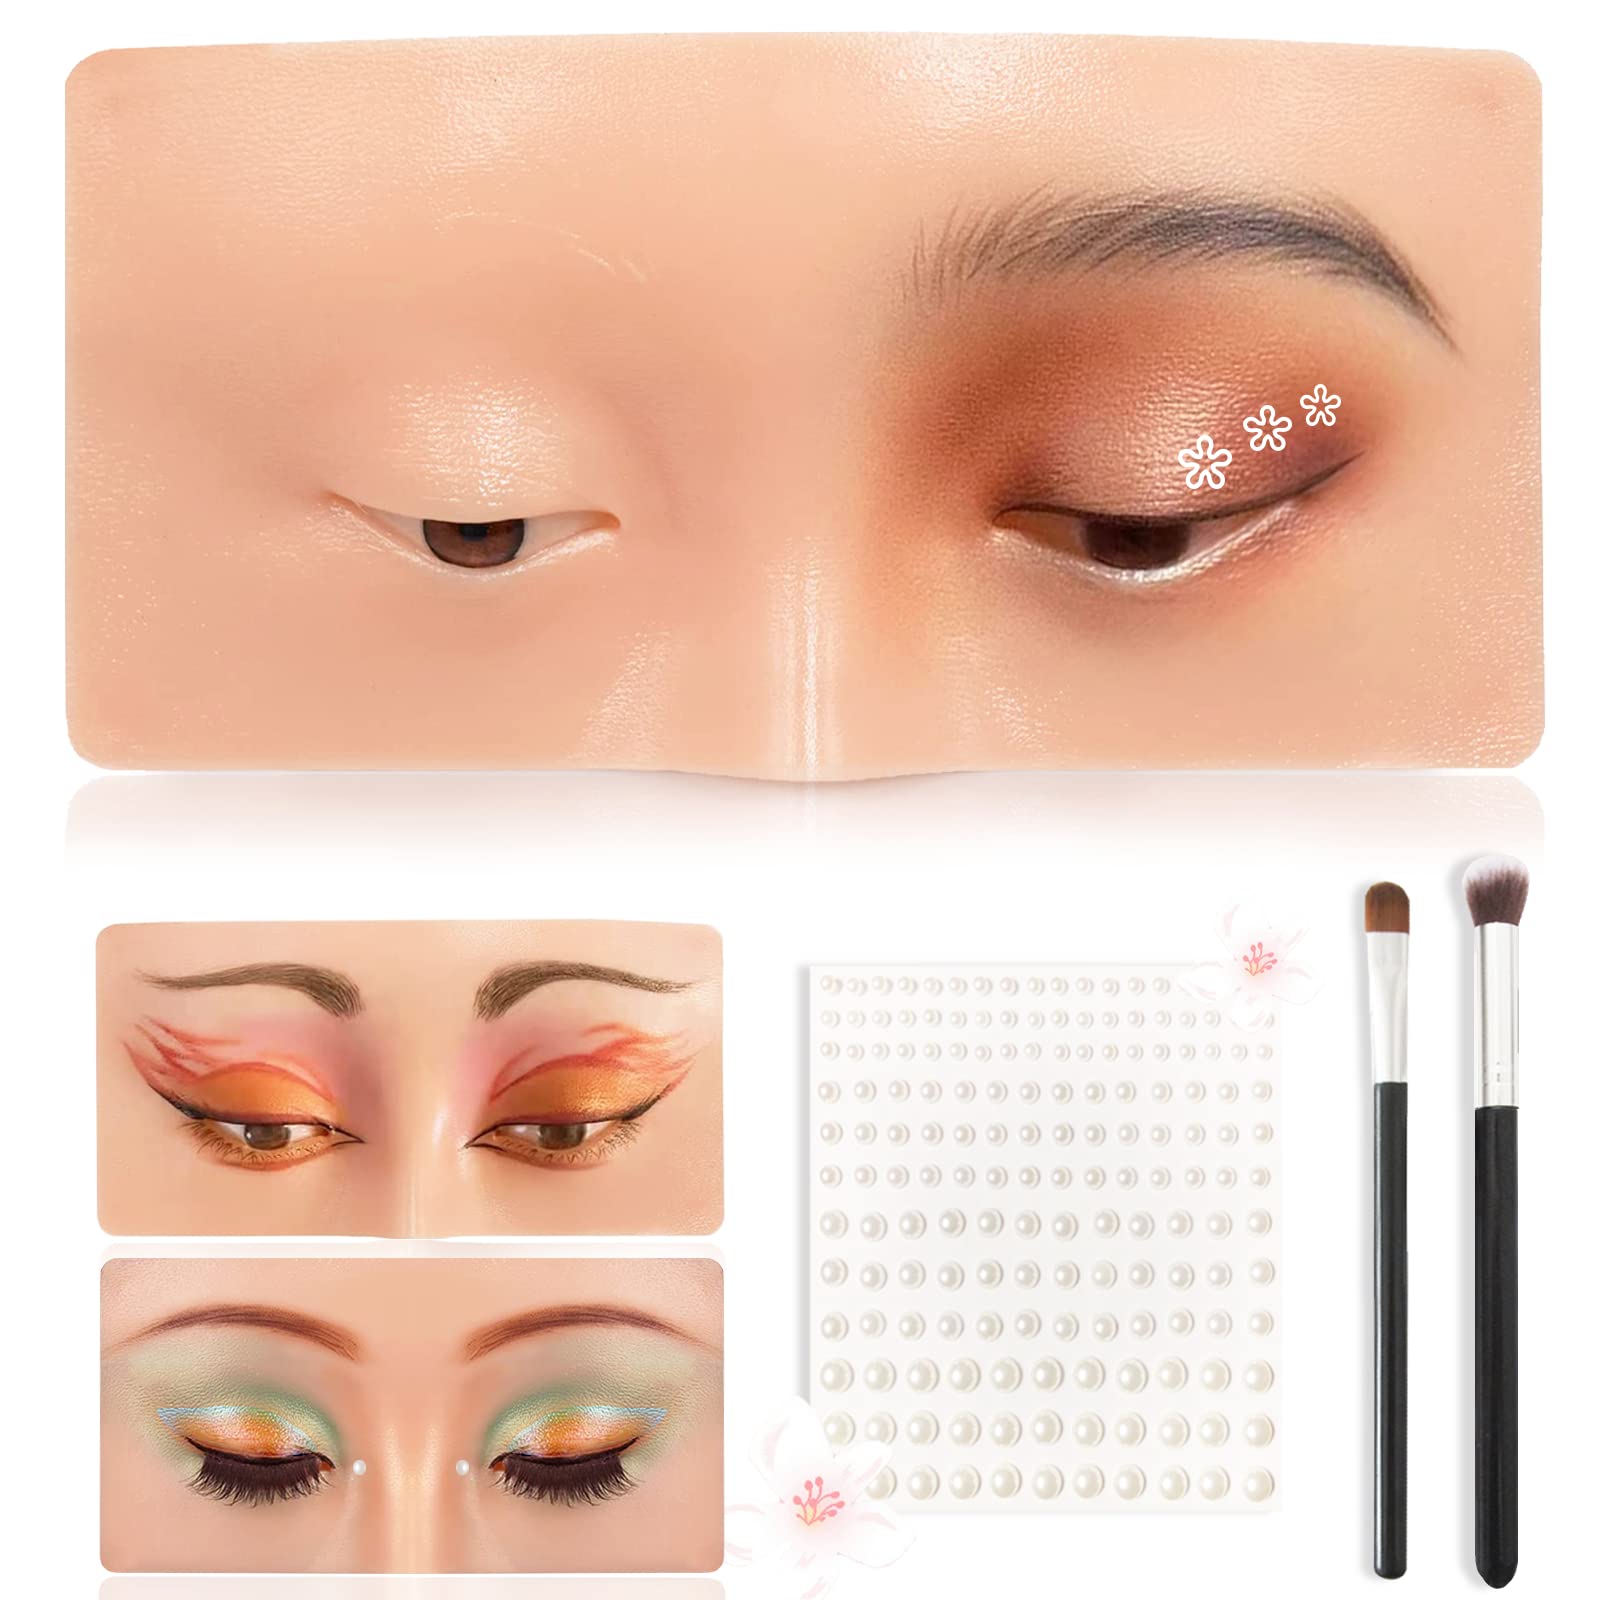 Makeup Practice Face, Silicone Makeup Practice Board, Face Eyes Makeup Mannequin for Makeup Artists and Beginners, with Makeup Brushes and 165Pcs Pearl Stickers (Bright)